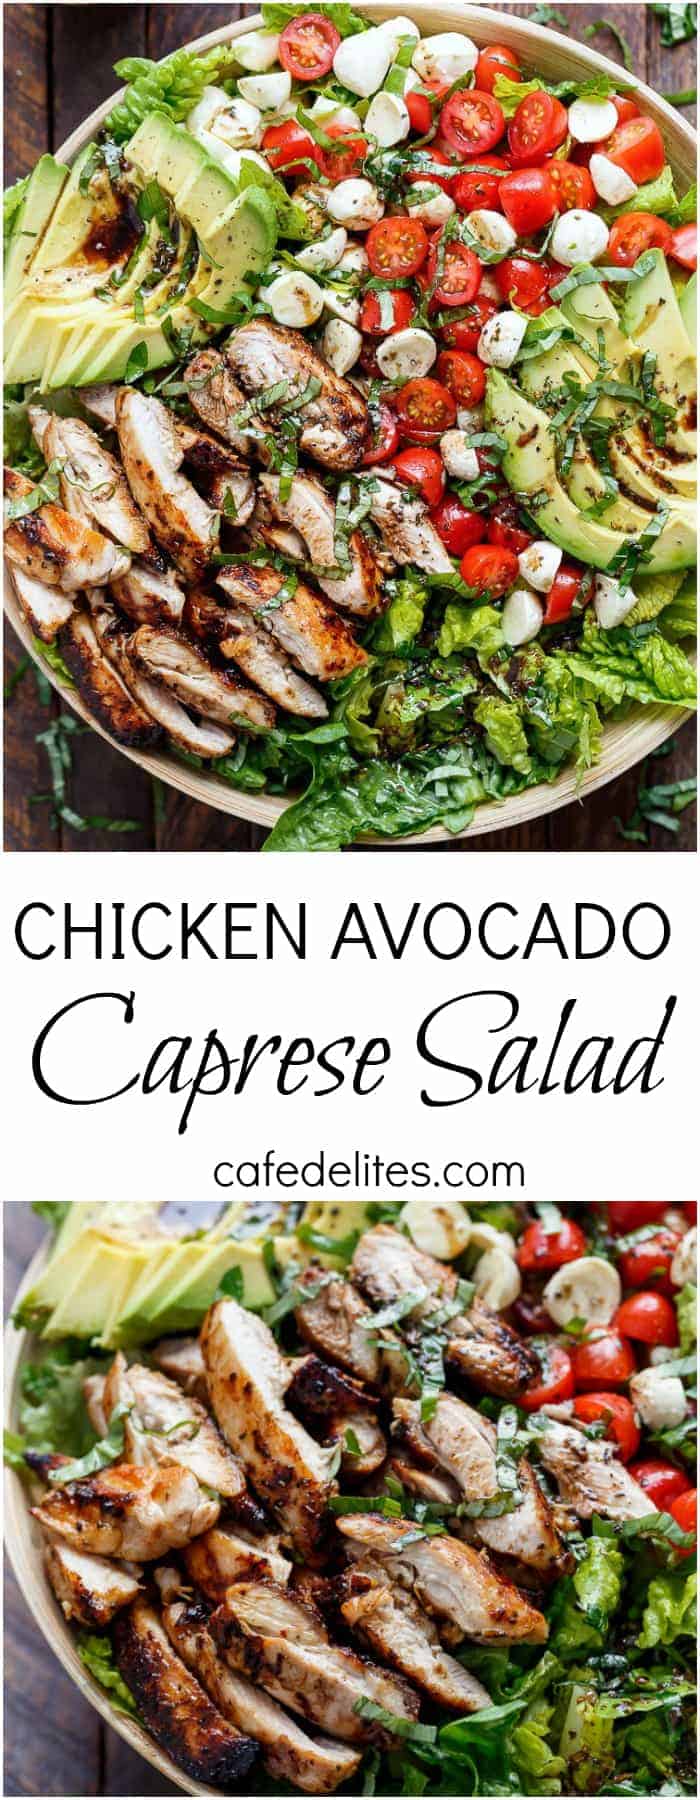 Balsamic Chicken Avocado Caprese Salad is a quick and easy meal in a salad drizzled with a balsamic dressing that doubles as a marinade! | https://cafedelites.com